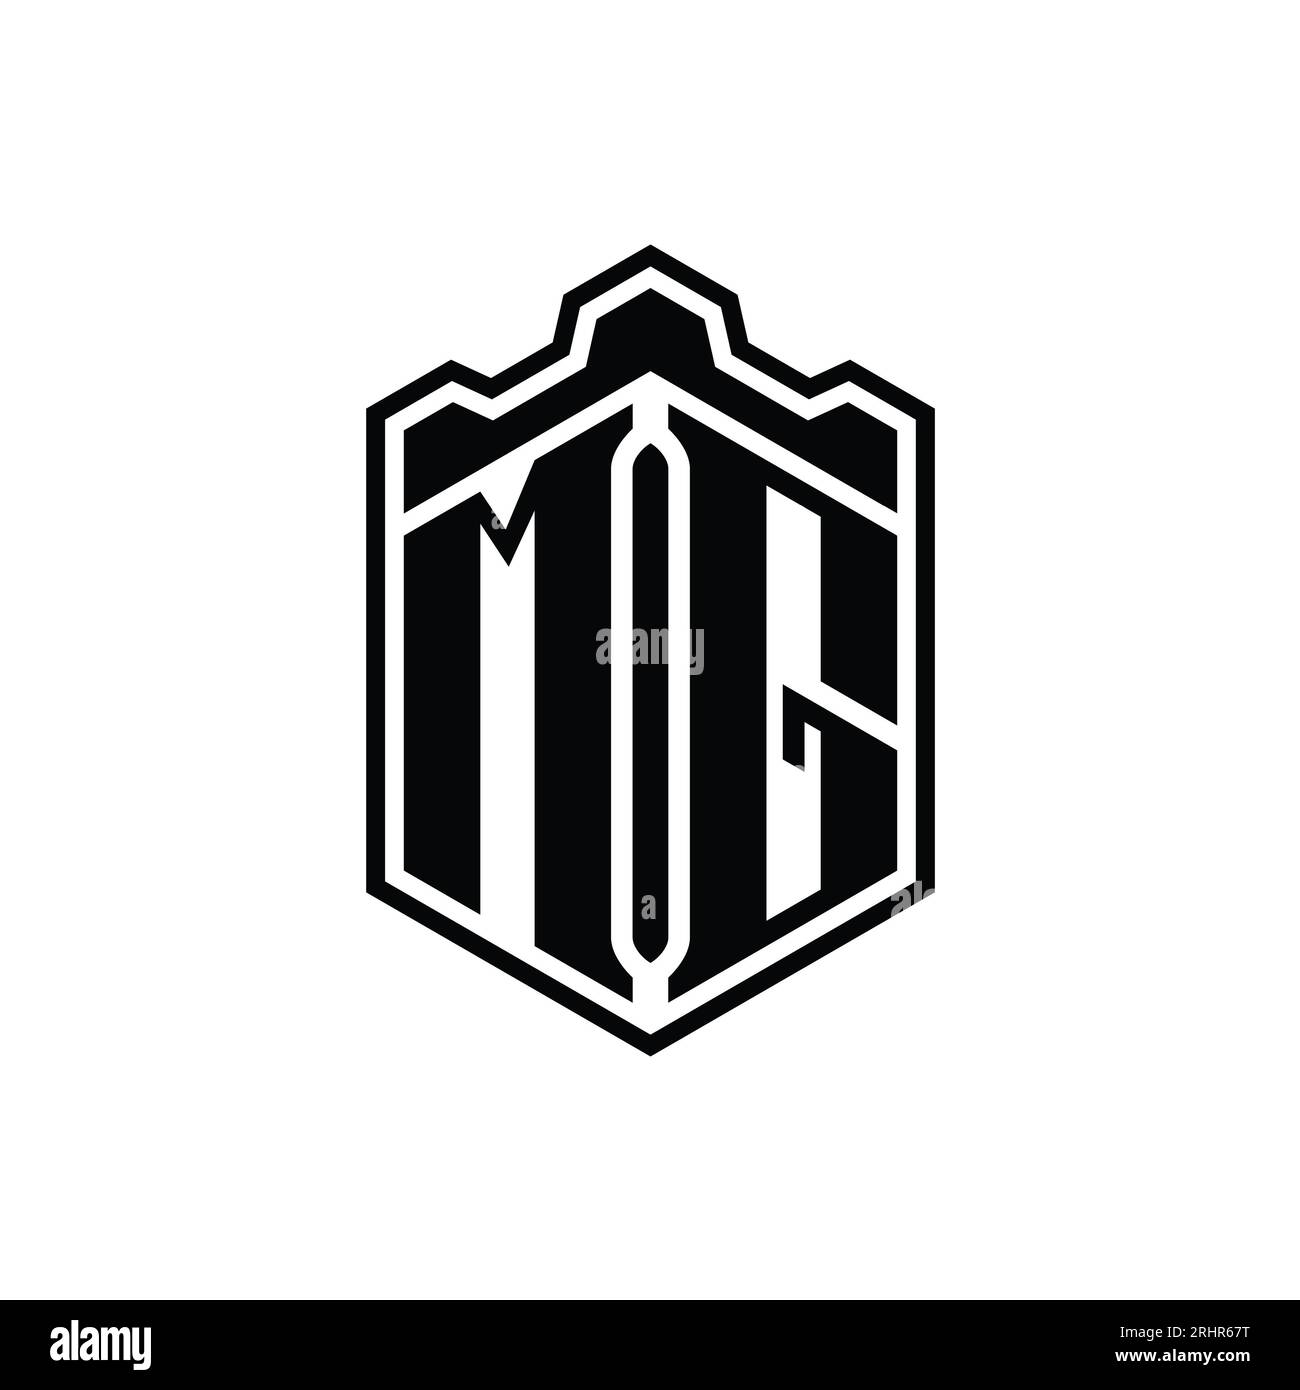 MG logo monogram emblem style with crown shape design template Stock Vector